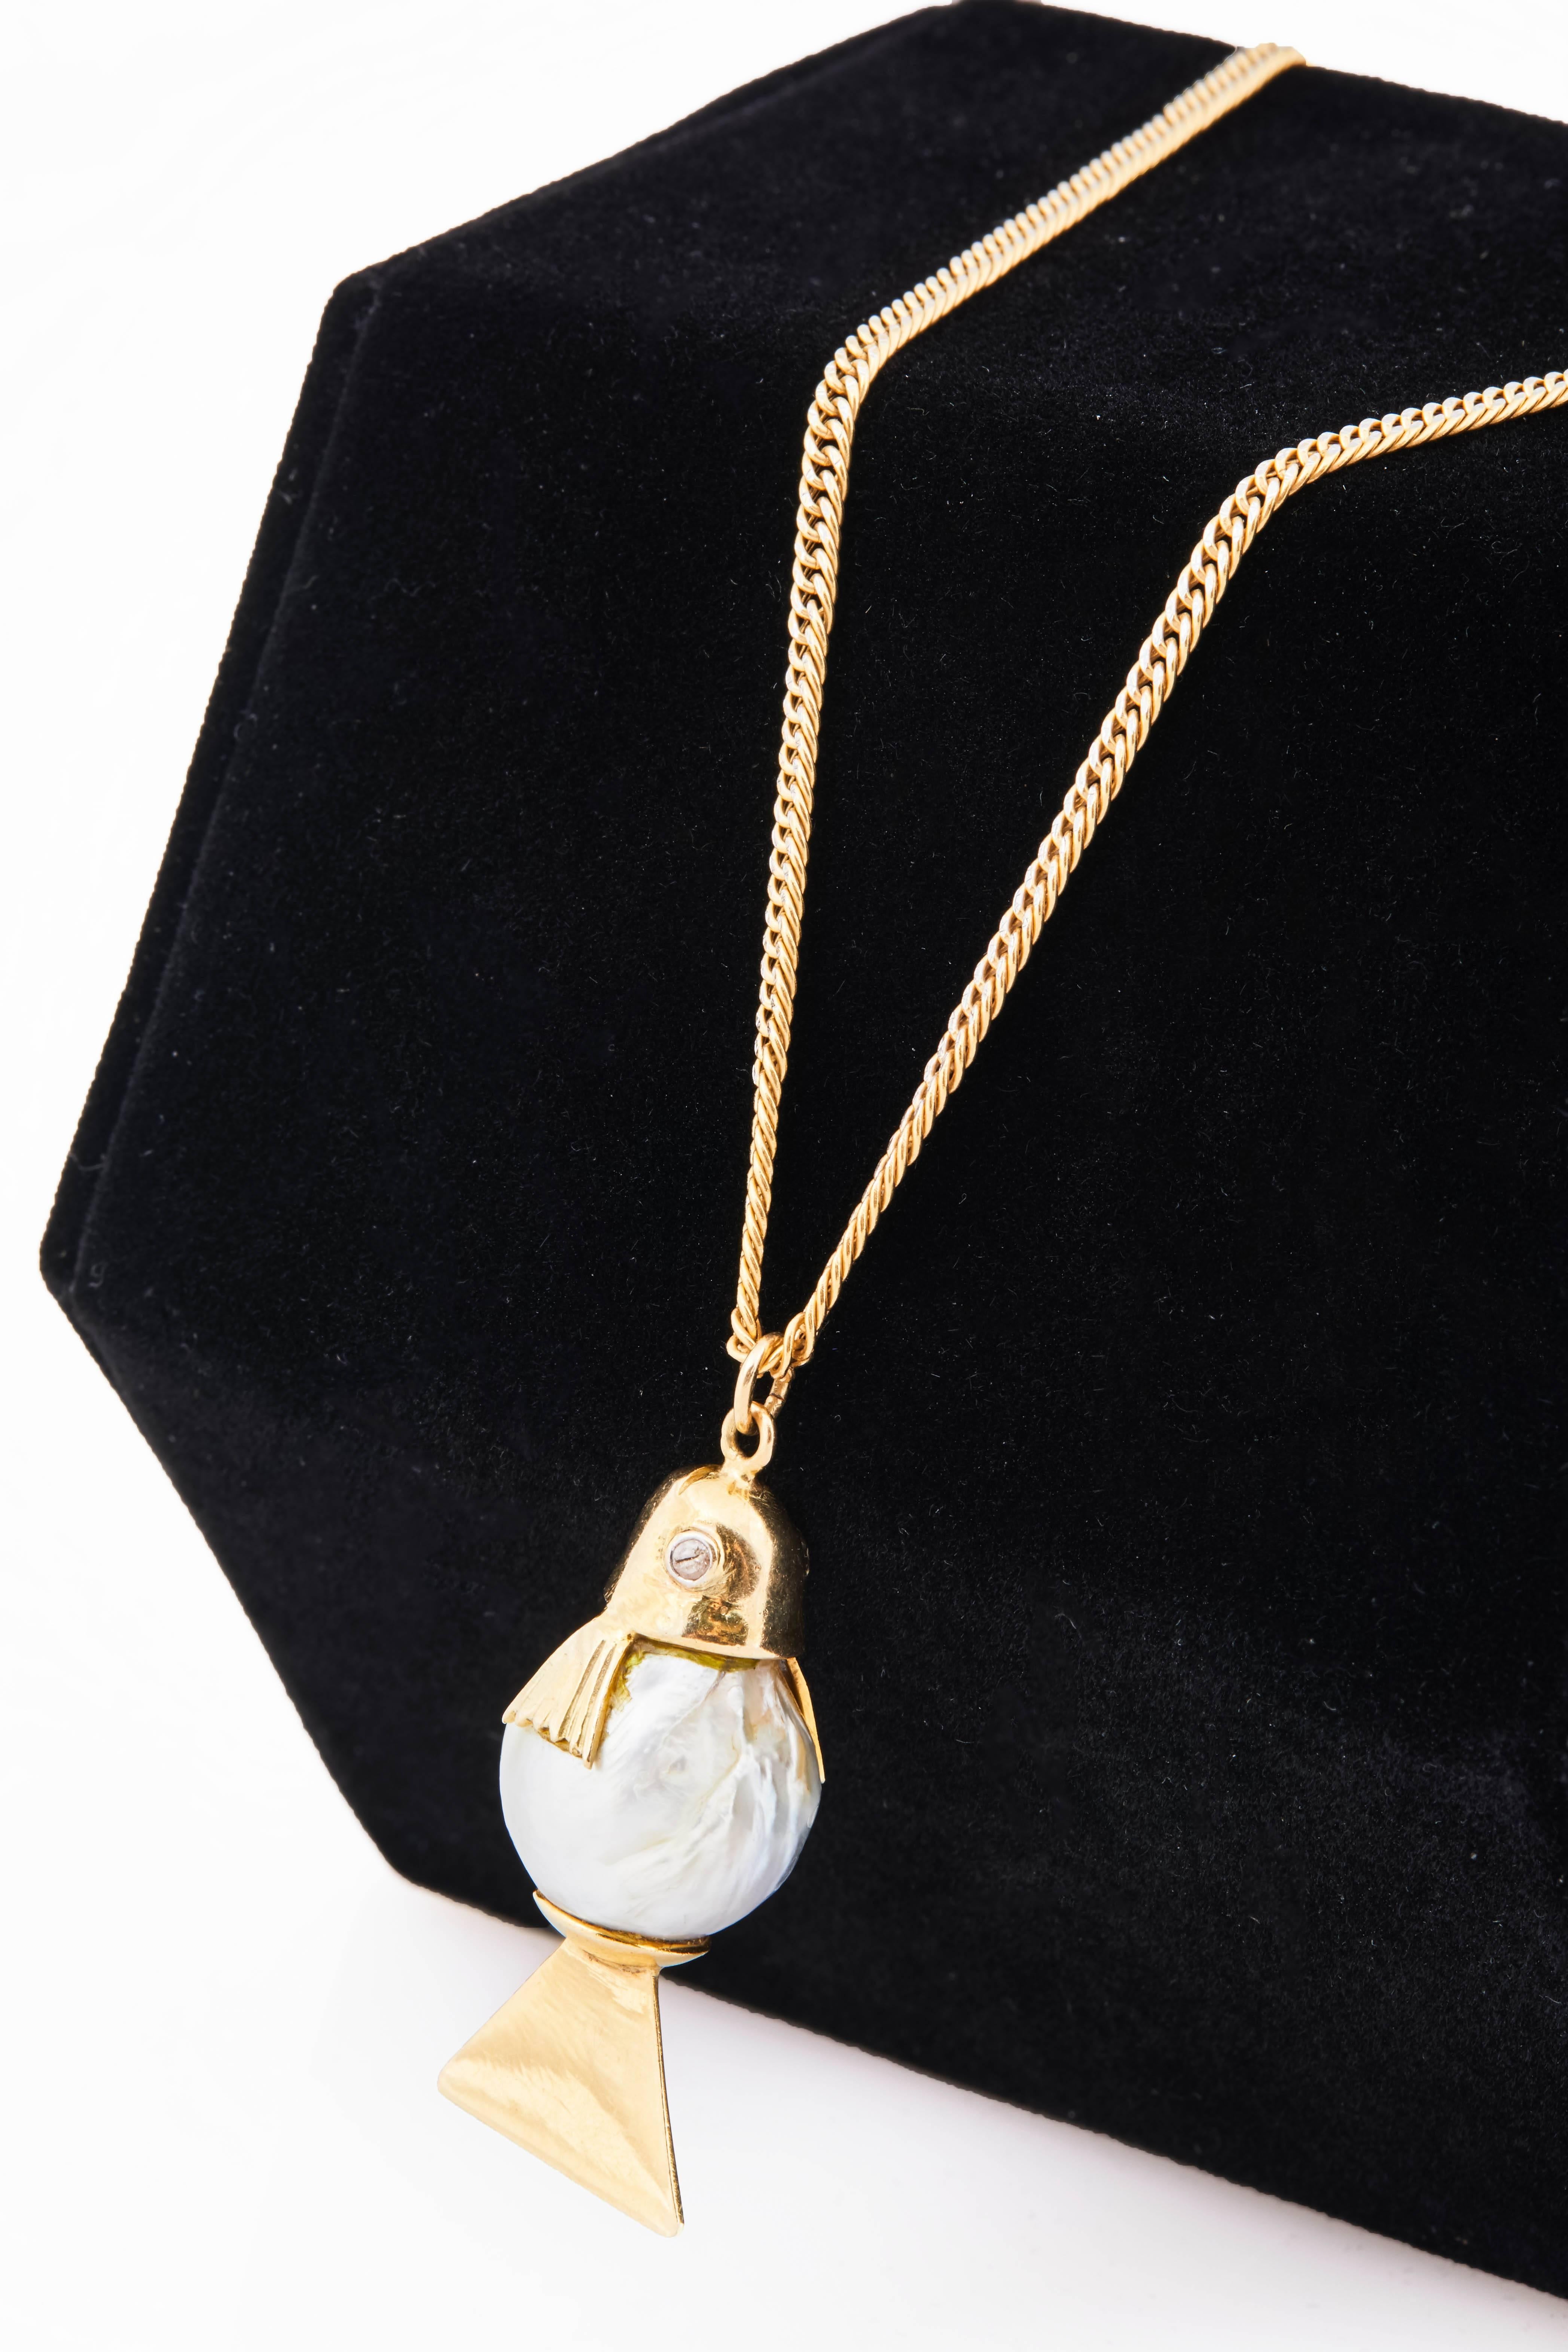 Round Cut Italian Natural Pearl and Diamond Fish Charm on 18k Gold Chain